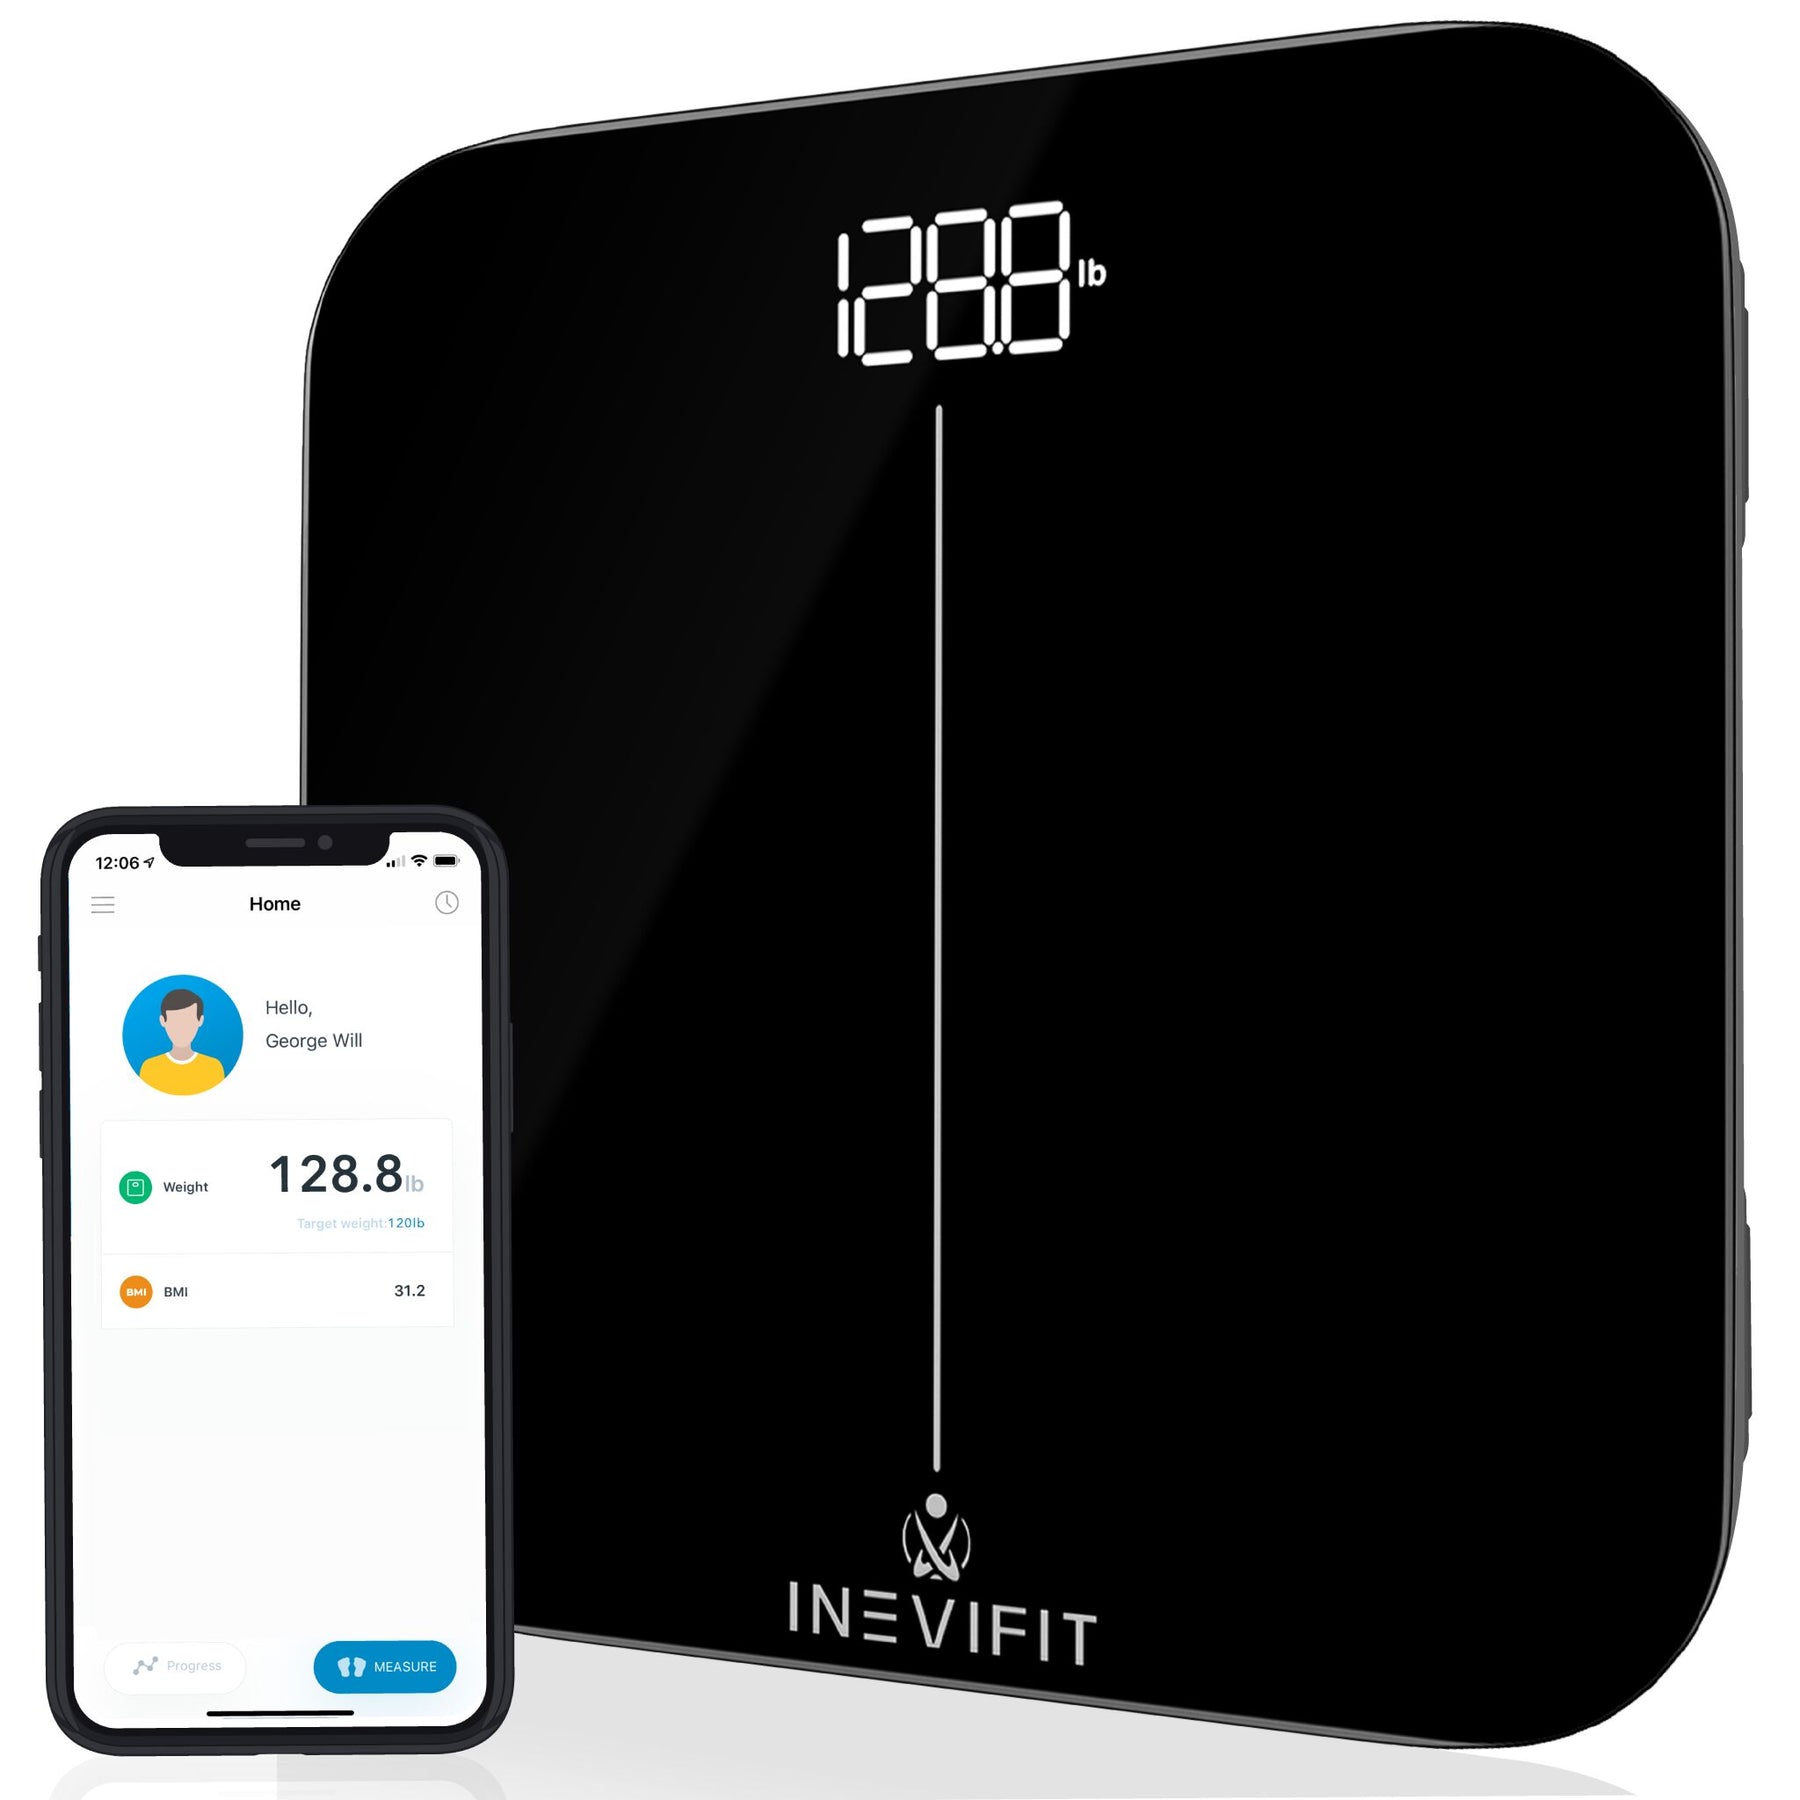 INEVIFIT Bathroom Scale, Highly Accurate Digital Bathroom Body Scale,  Measures Weight up to 400 lbs. Includes